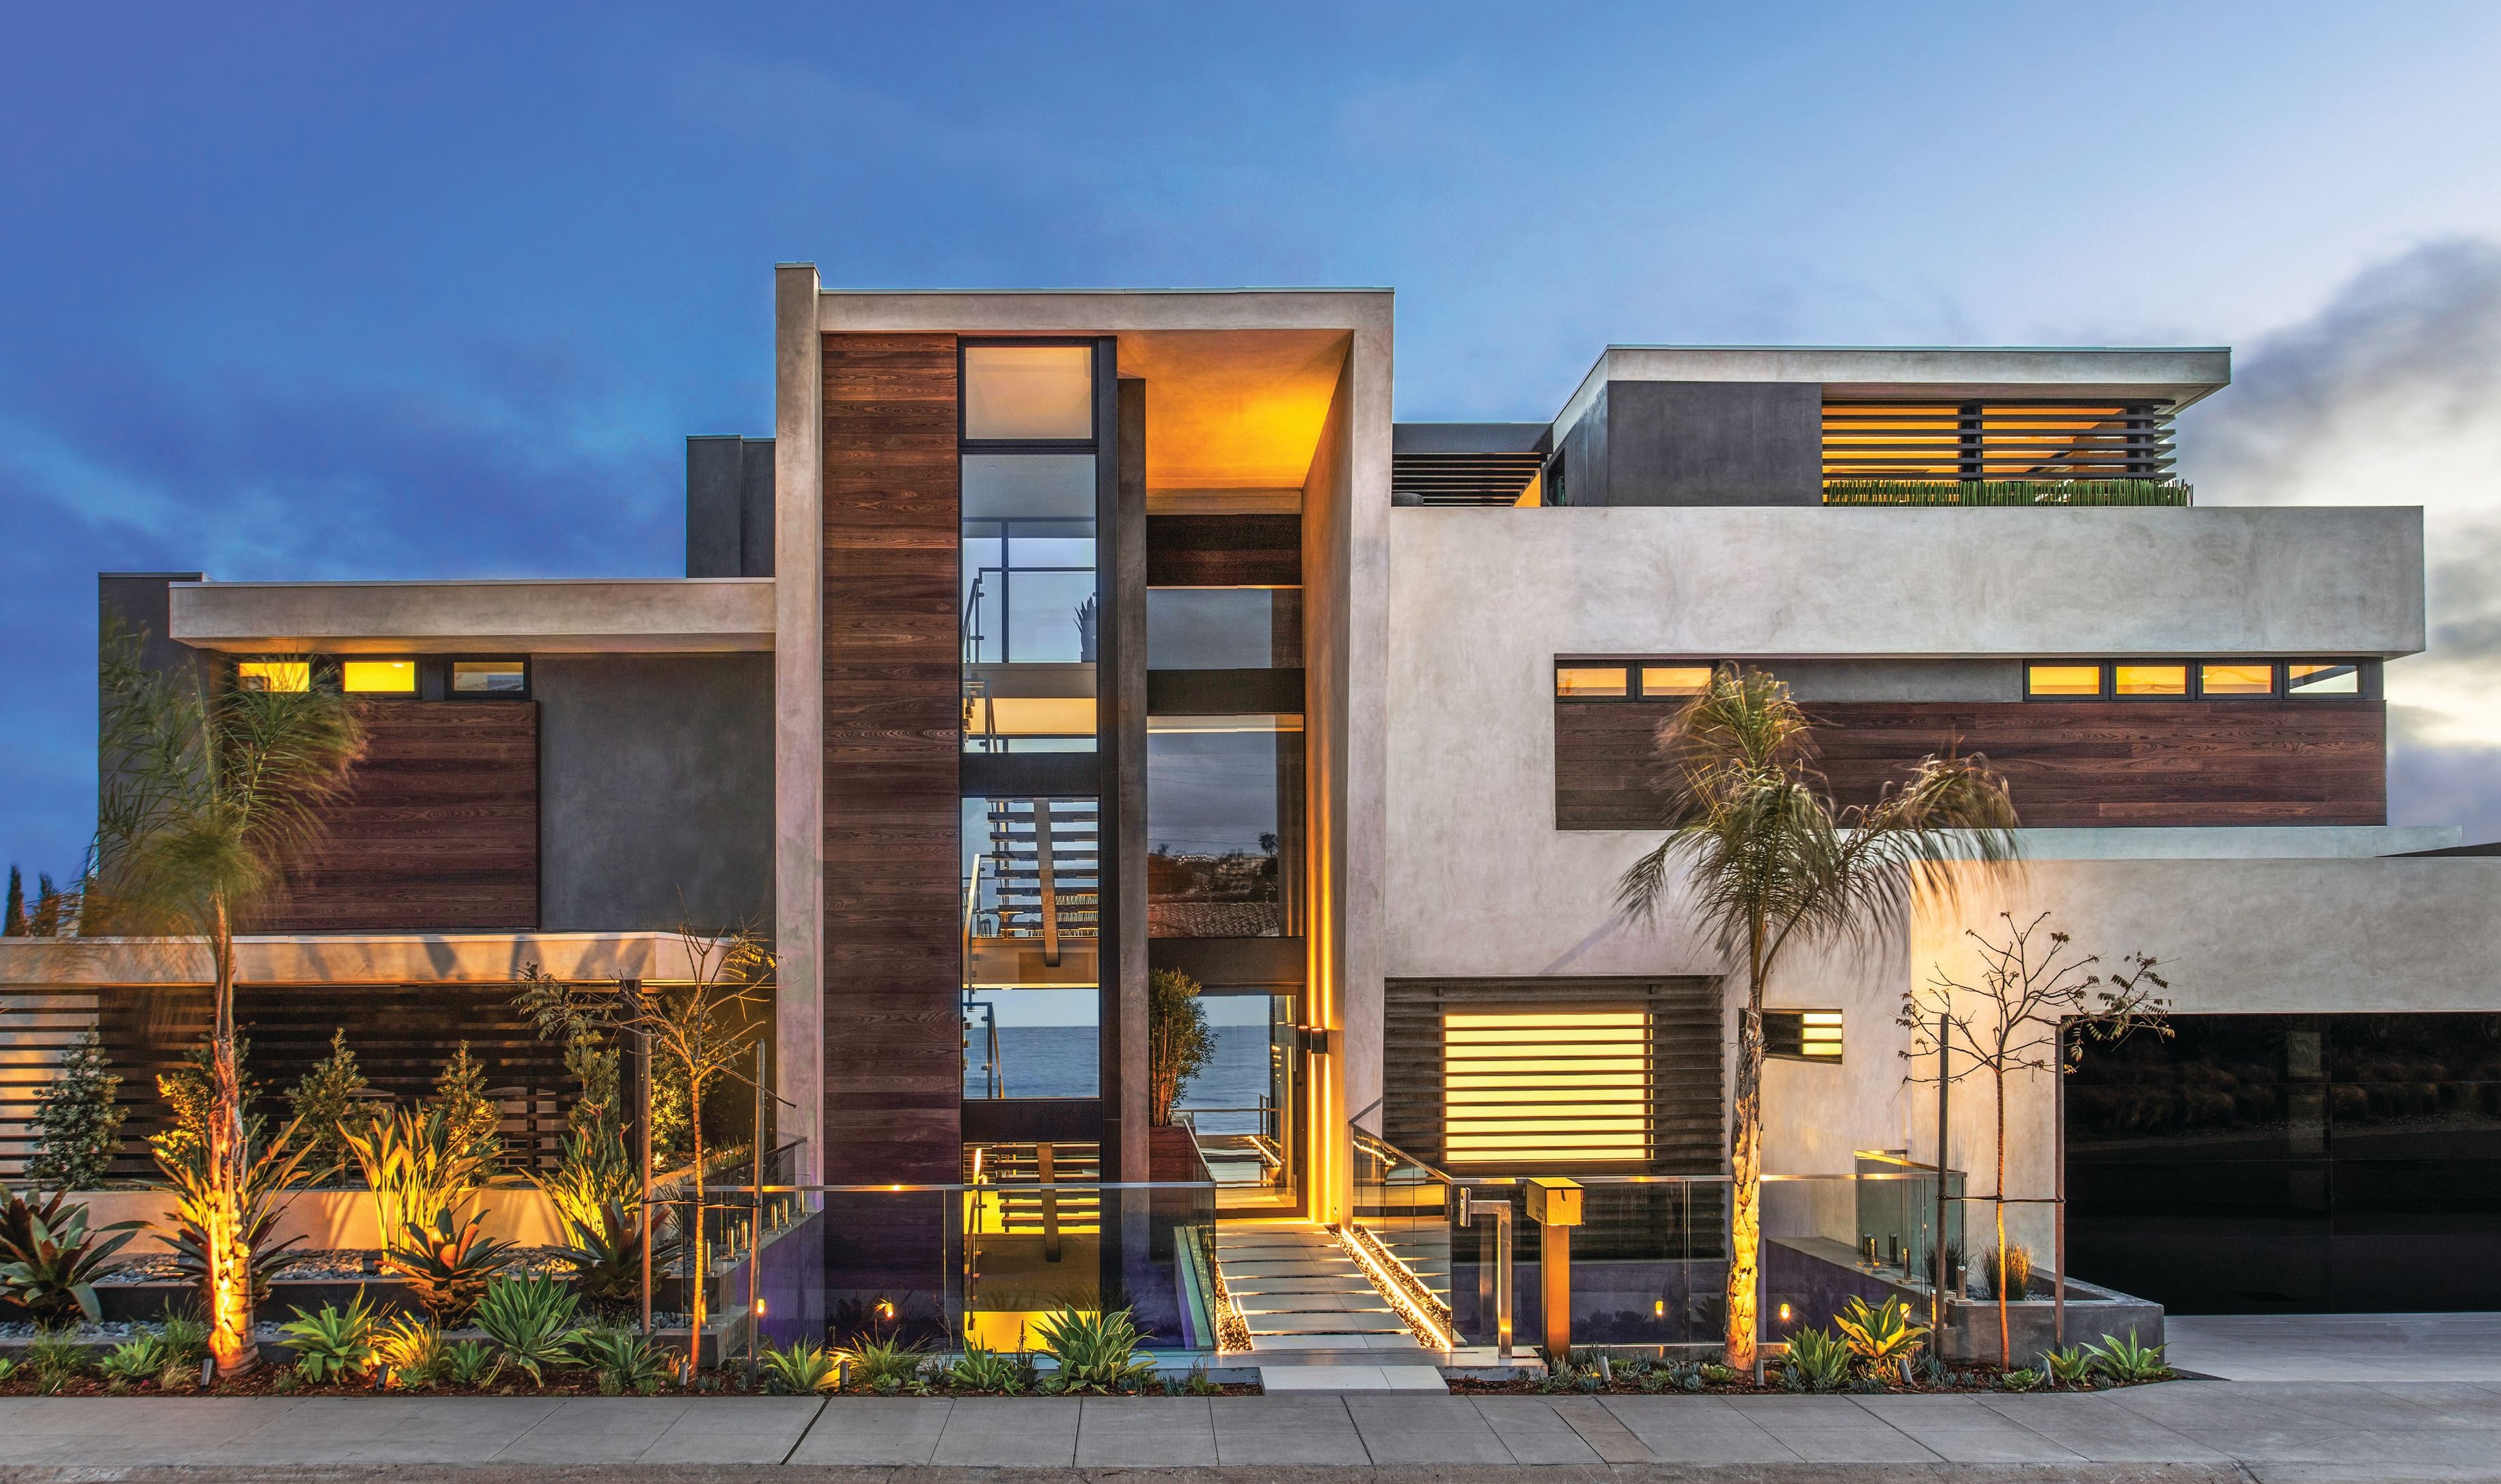 Blue Heron’s second new-construction project in California, The Ora House is an 8,878-square-foot home comprised of four horizontally tiered levels. PHOTO COURTESY OF BLUE HERON